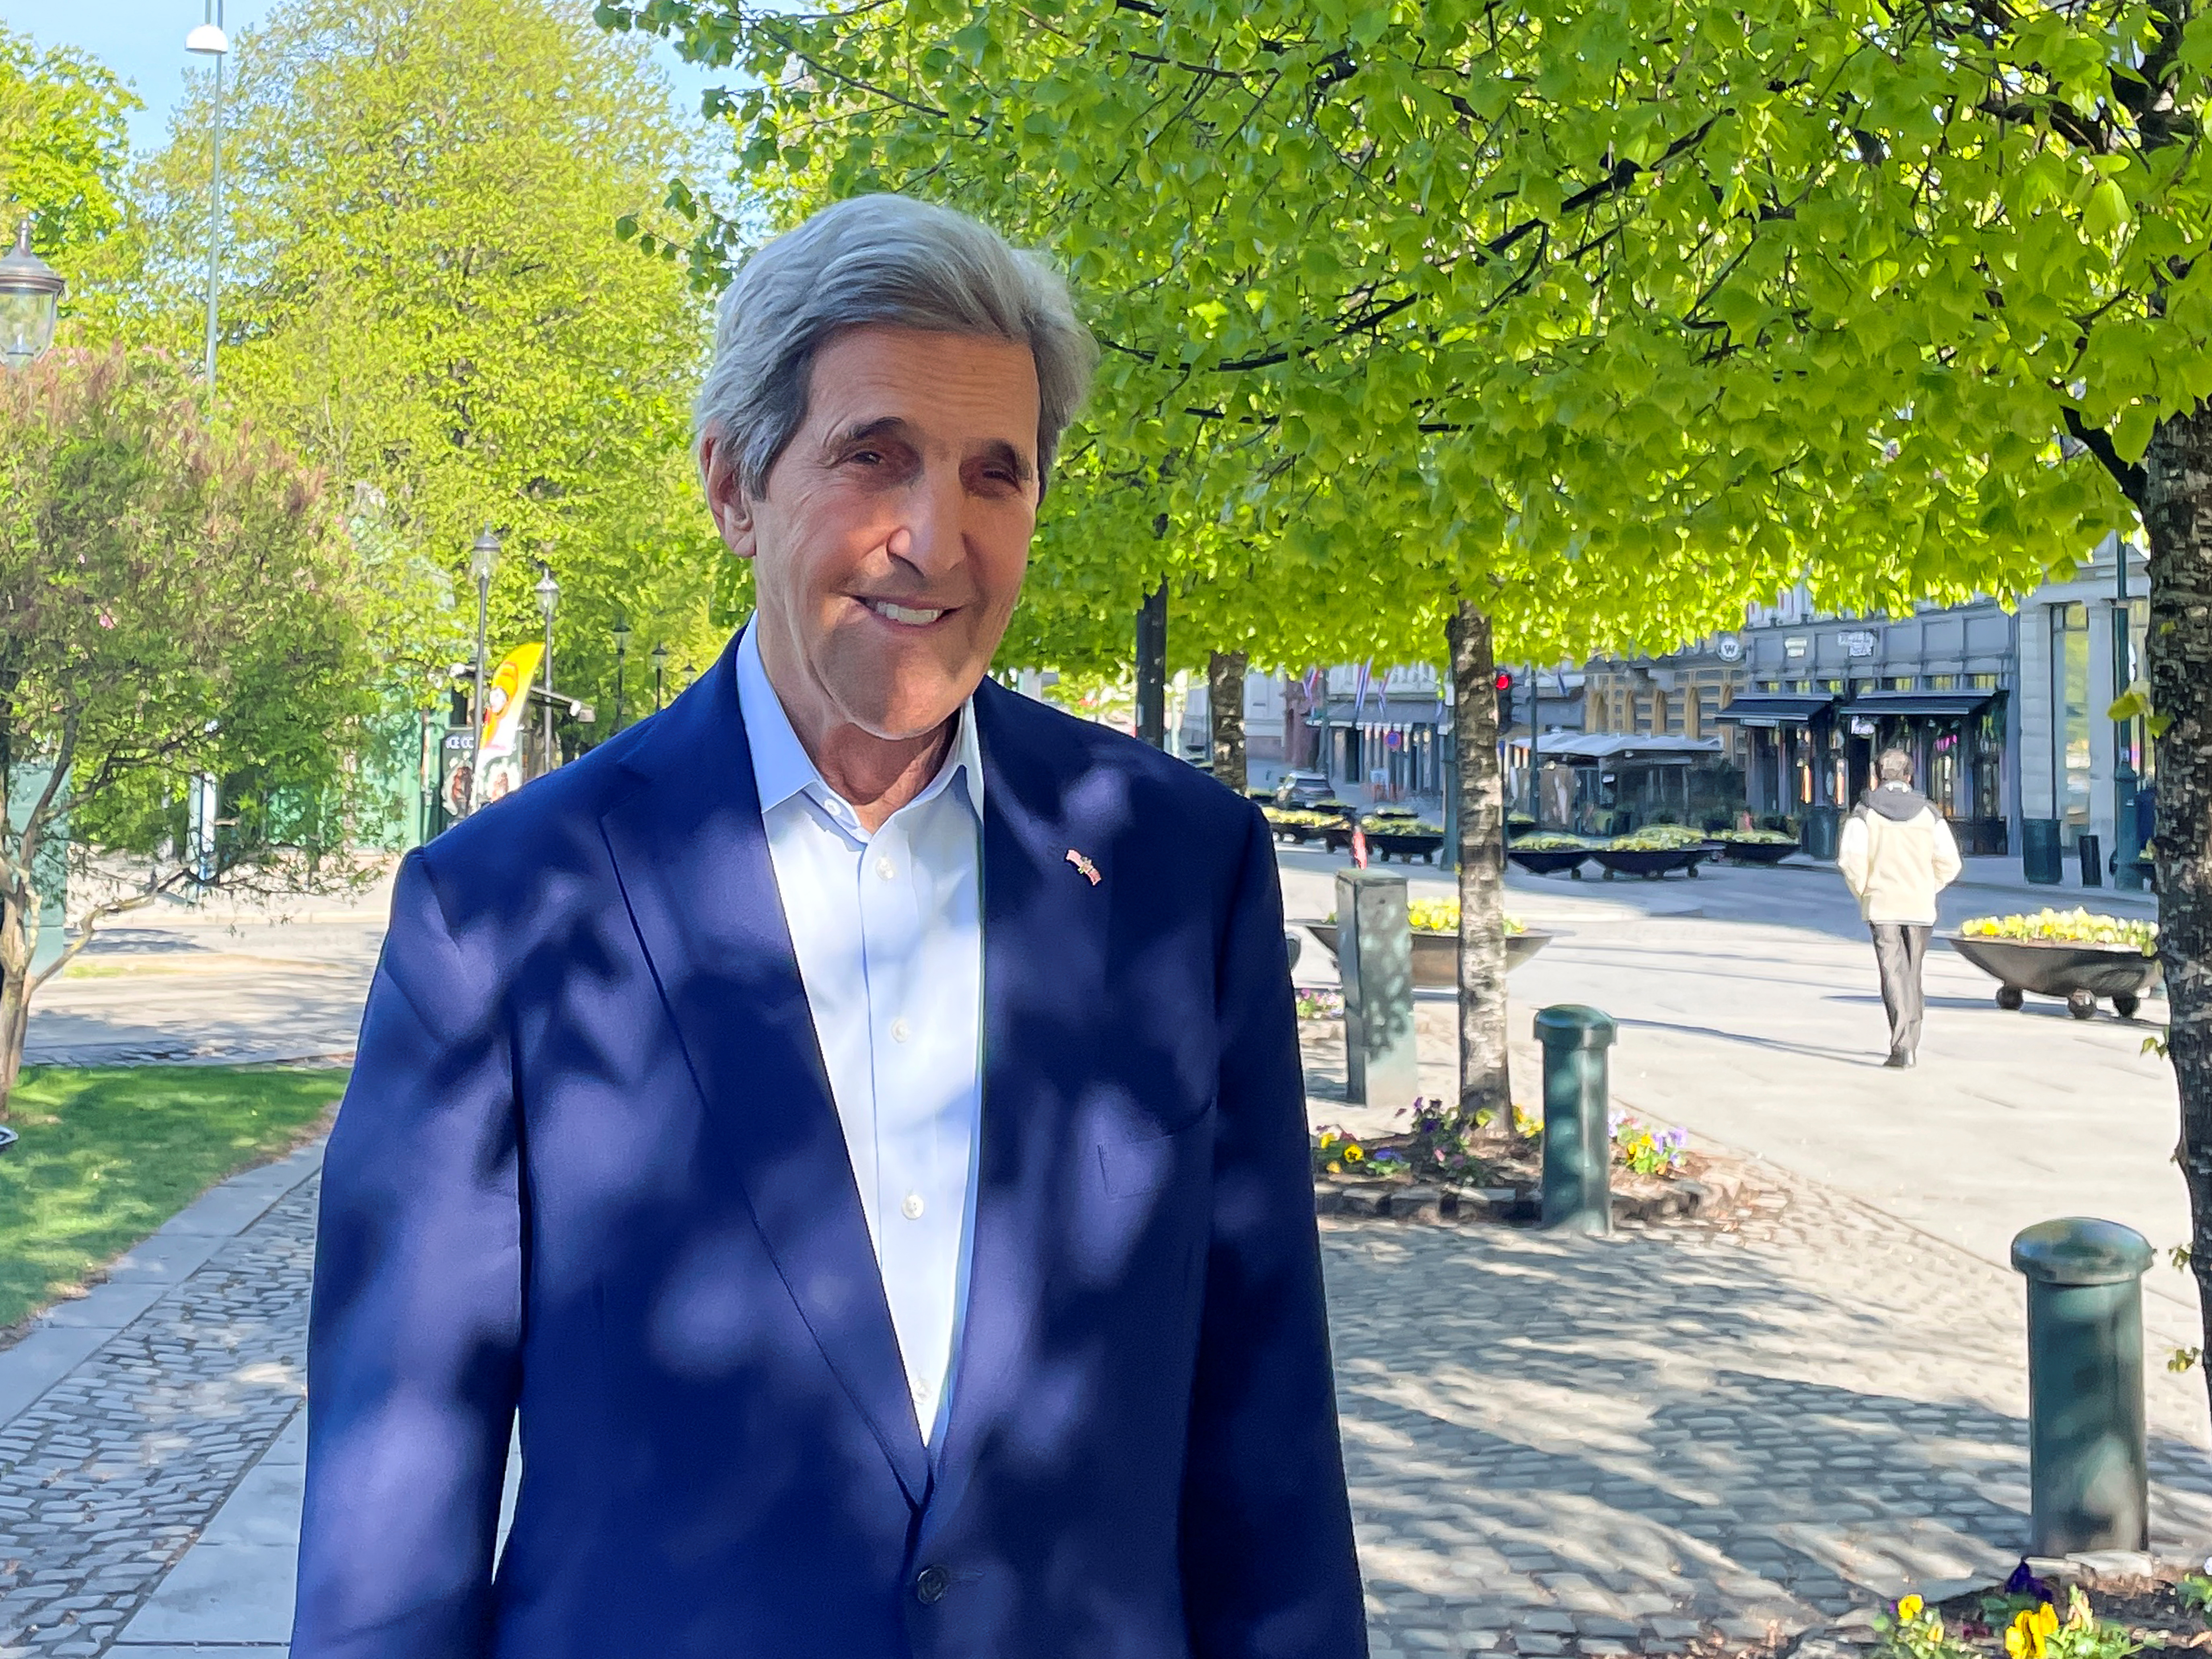 U.S. Special Presidential Envoy for Climate John Kerry visits Oslo